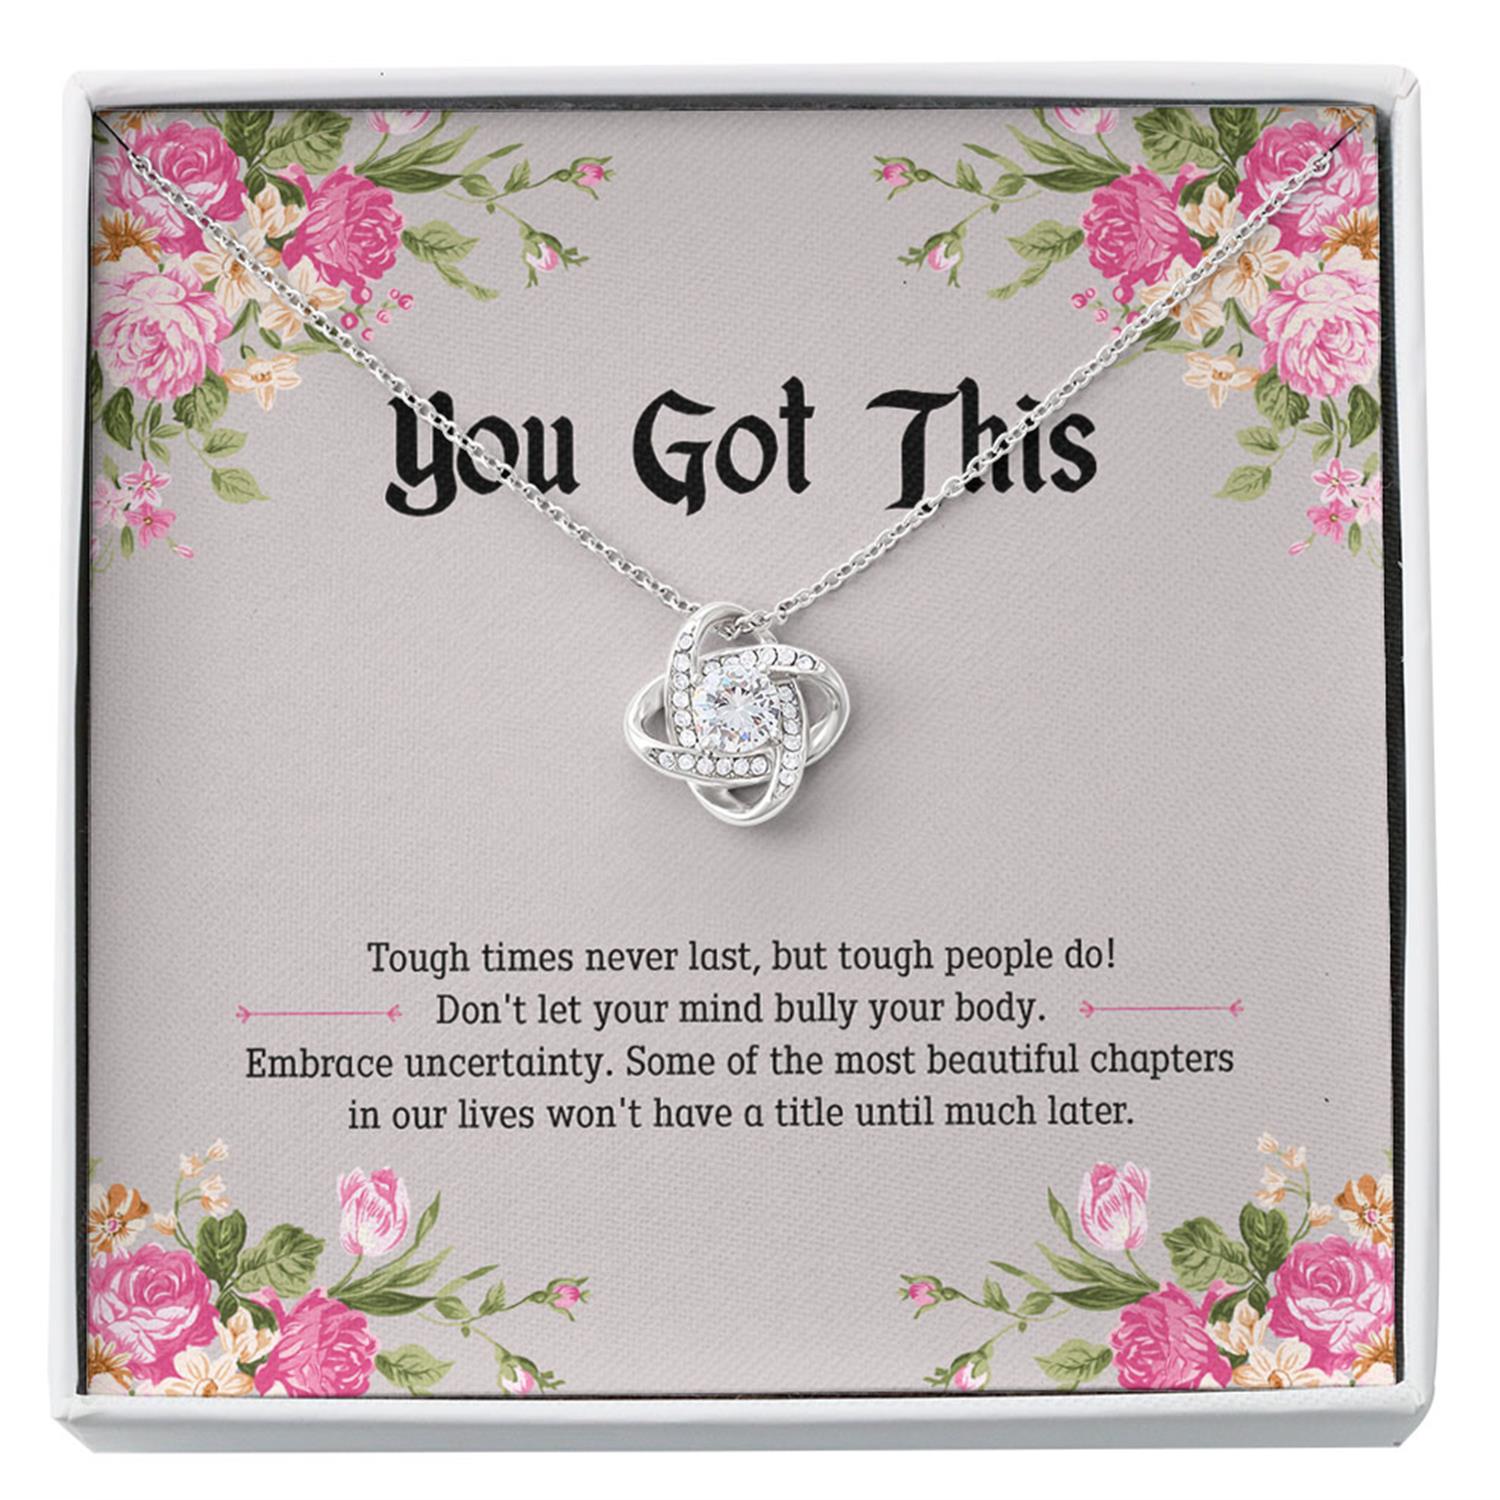 You Got This Necklace, Breast Cancer Gifts, Encouragement, Cheer Up, Divorce Custom Necklace